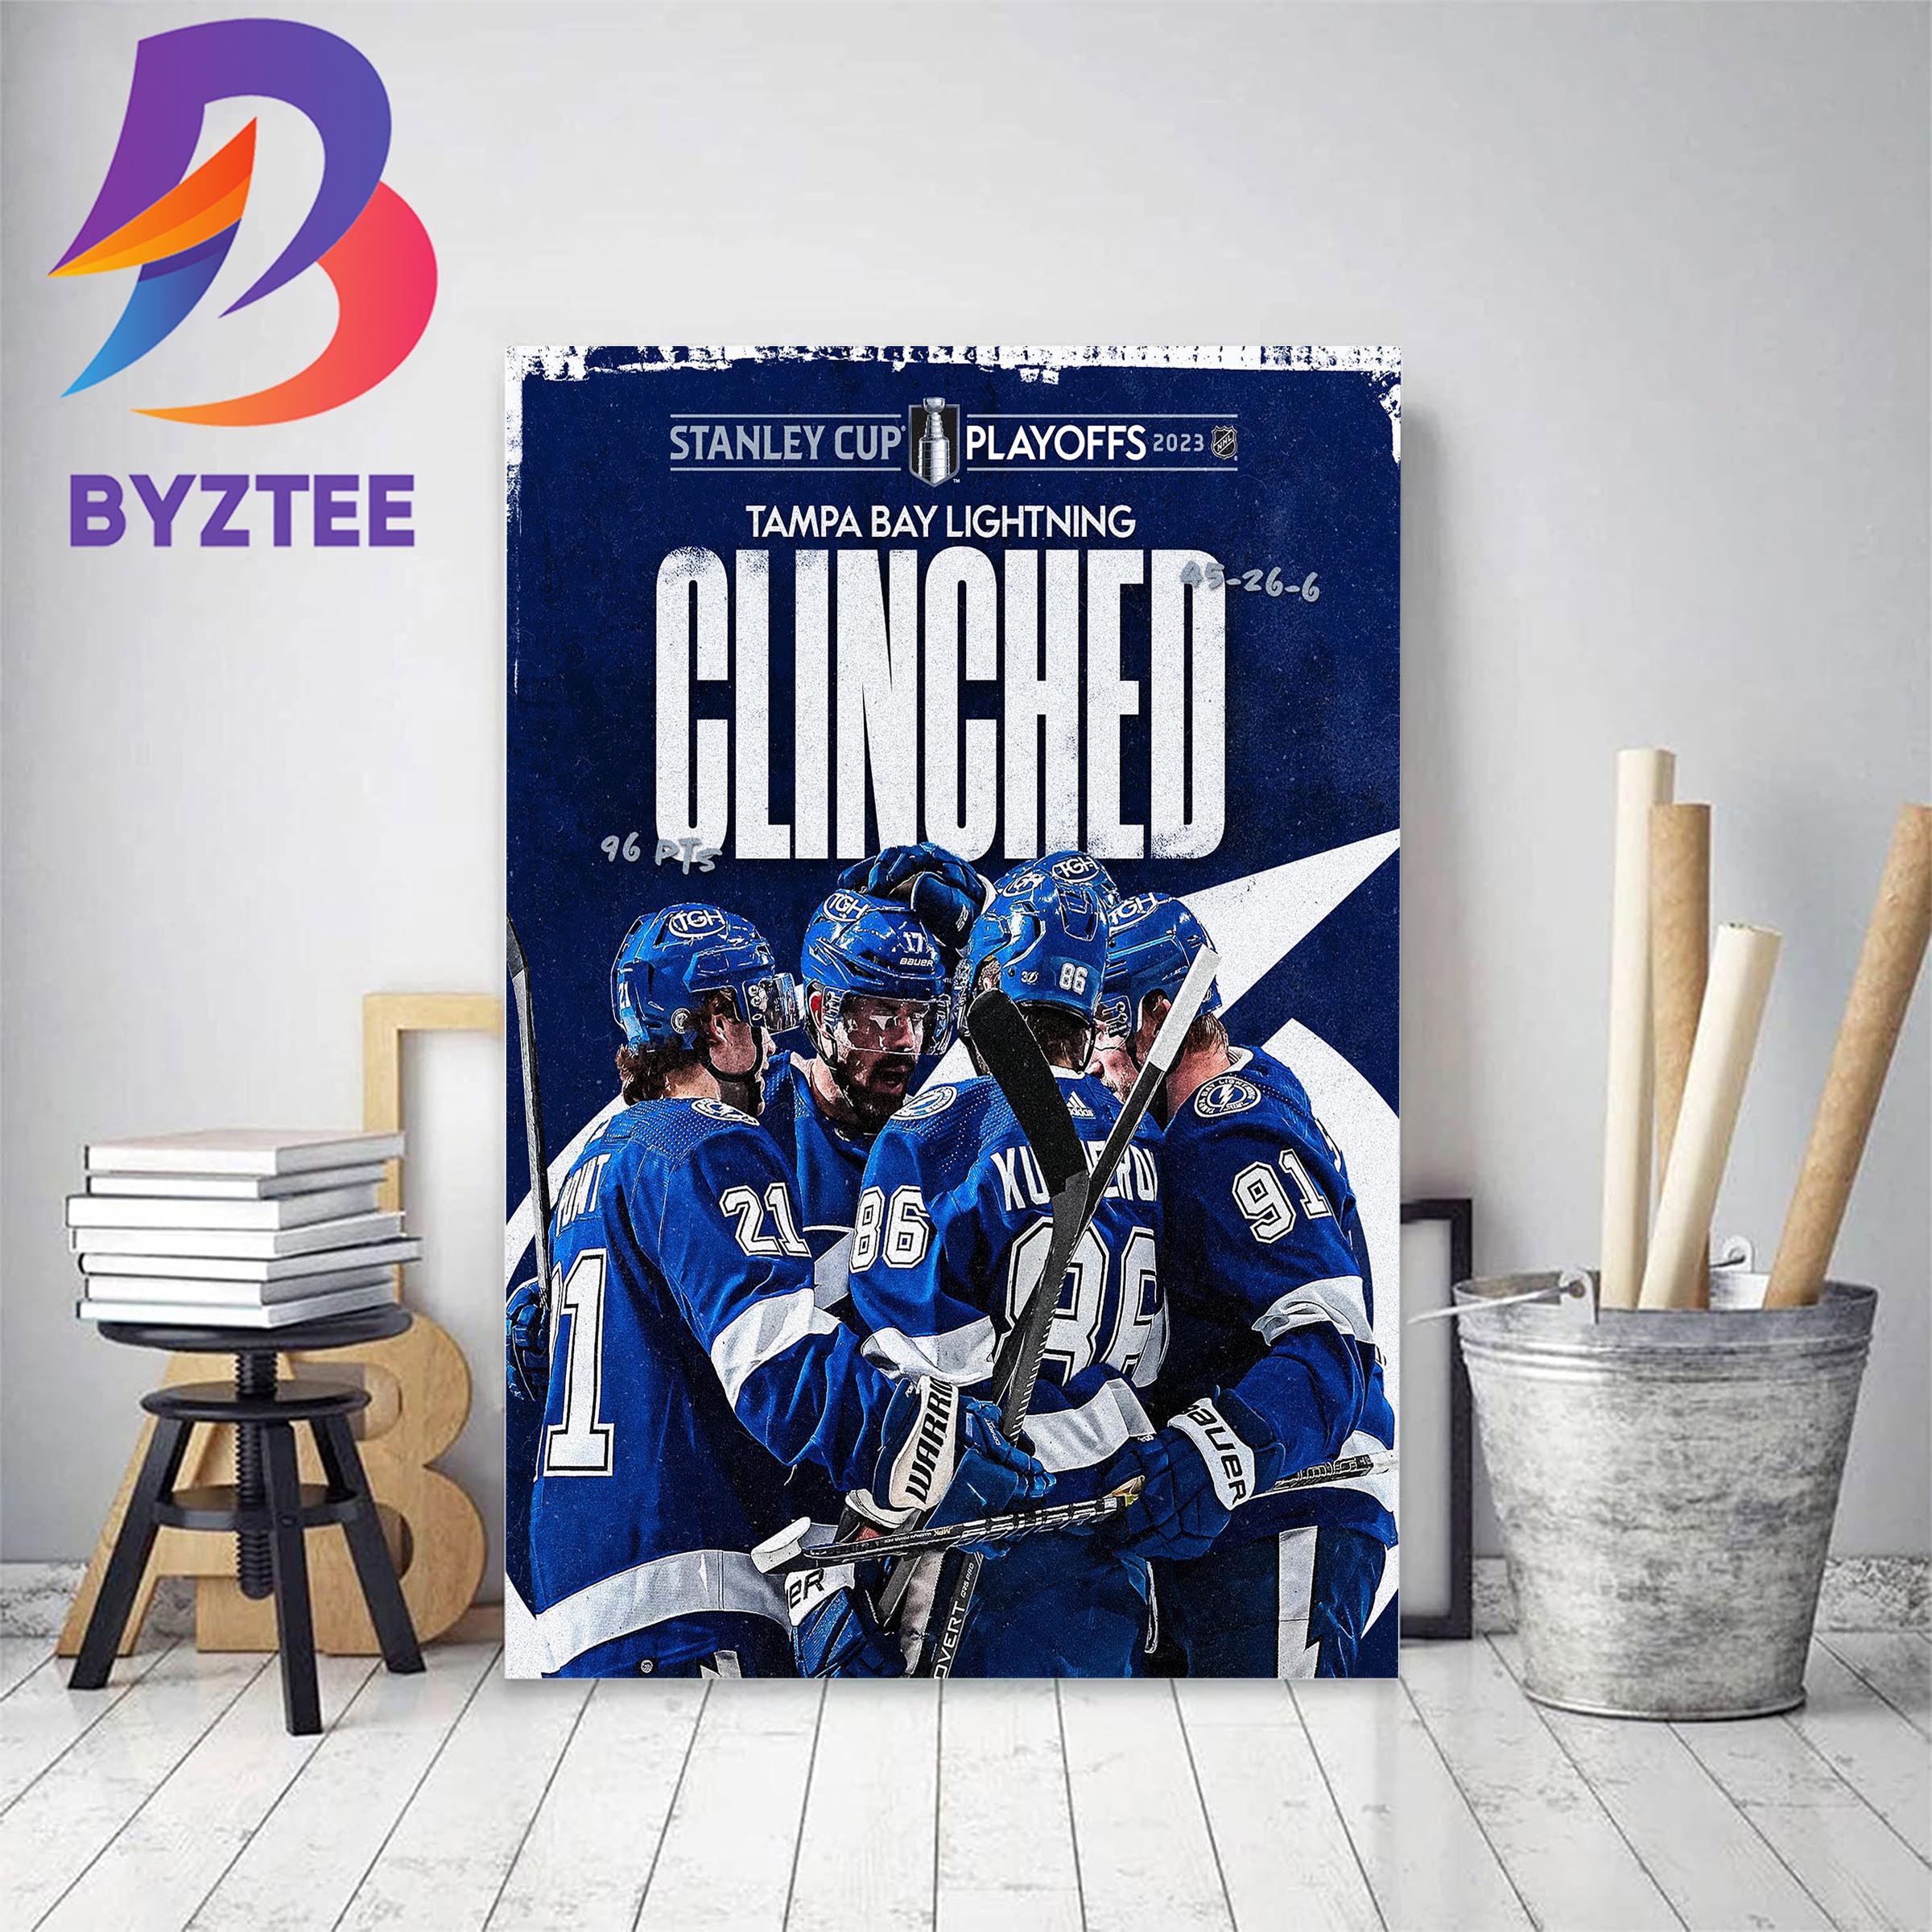 Tampa Bay Lightning Clinched Stanley Cup Playoffs 2023 Decor